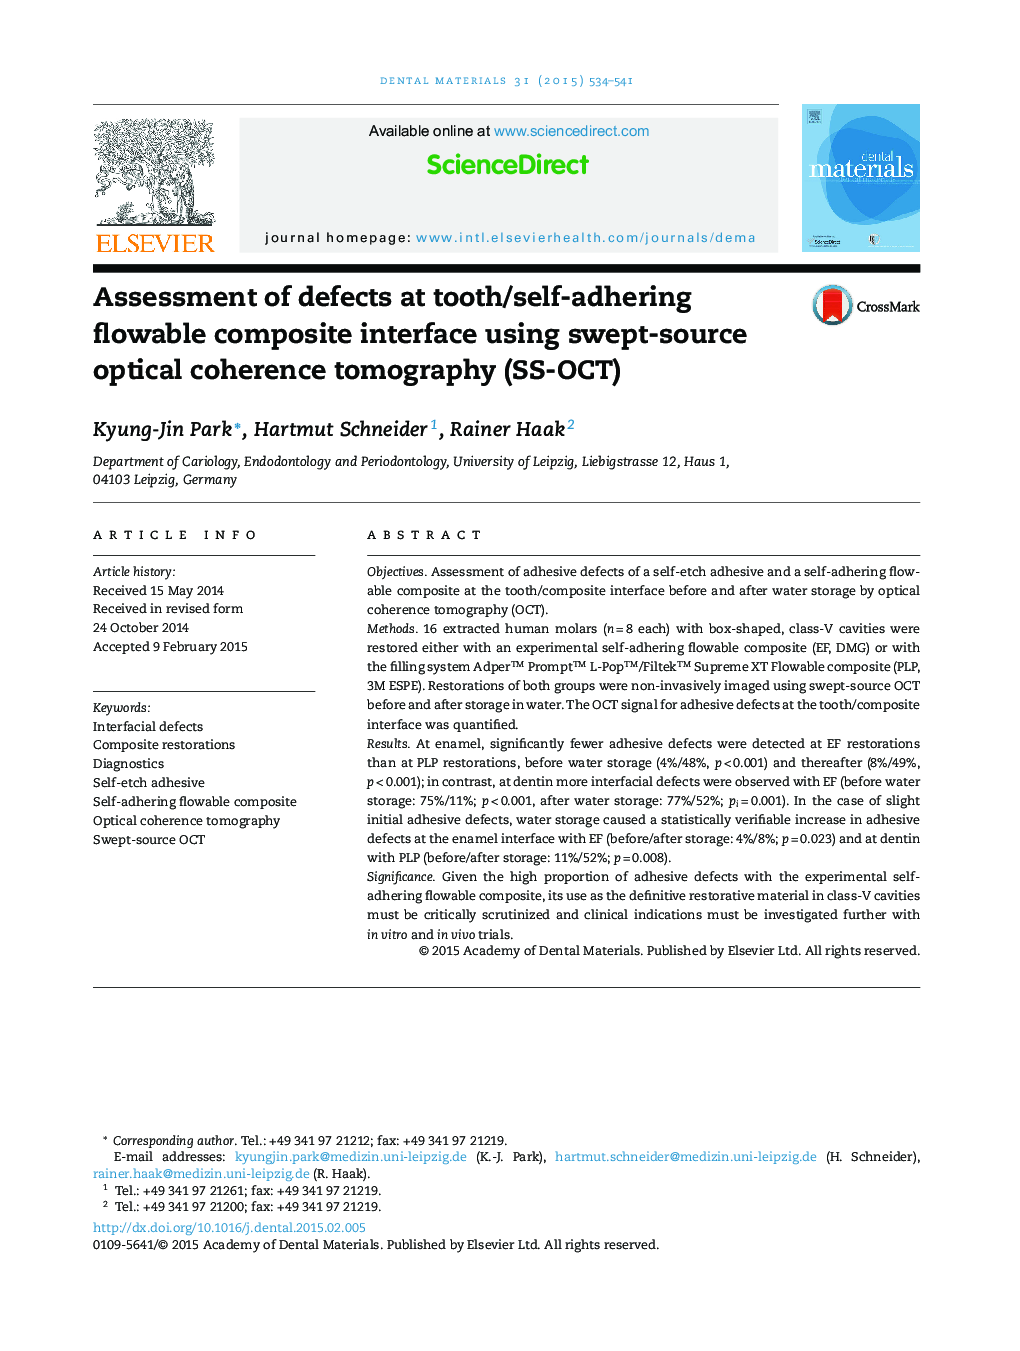 Assessment of defects at tooth/self-adhering flowable composite interface using swept-source optical coherence tomography (SS-OCT)